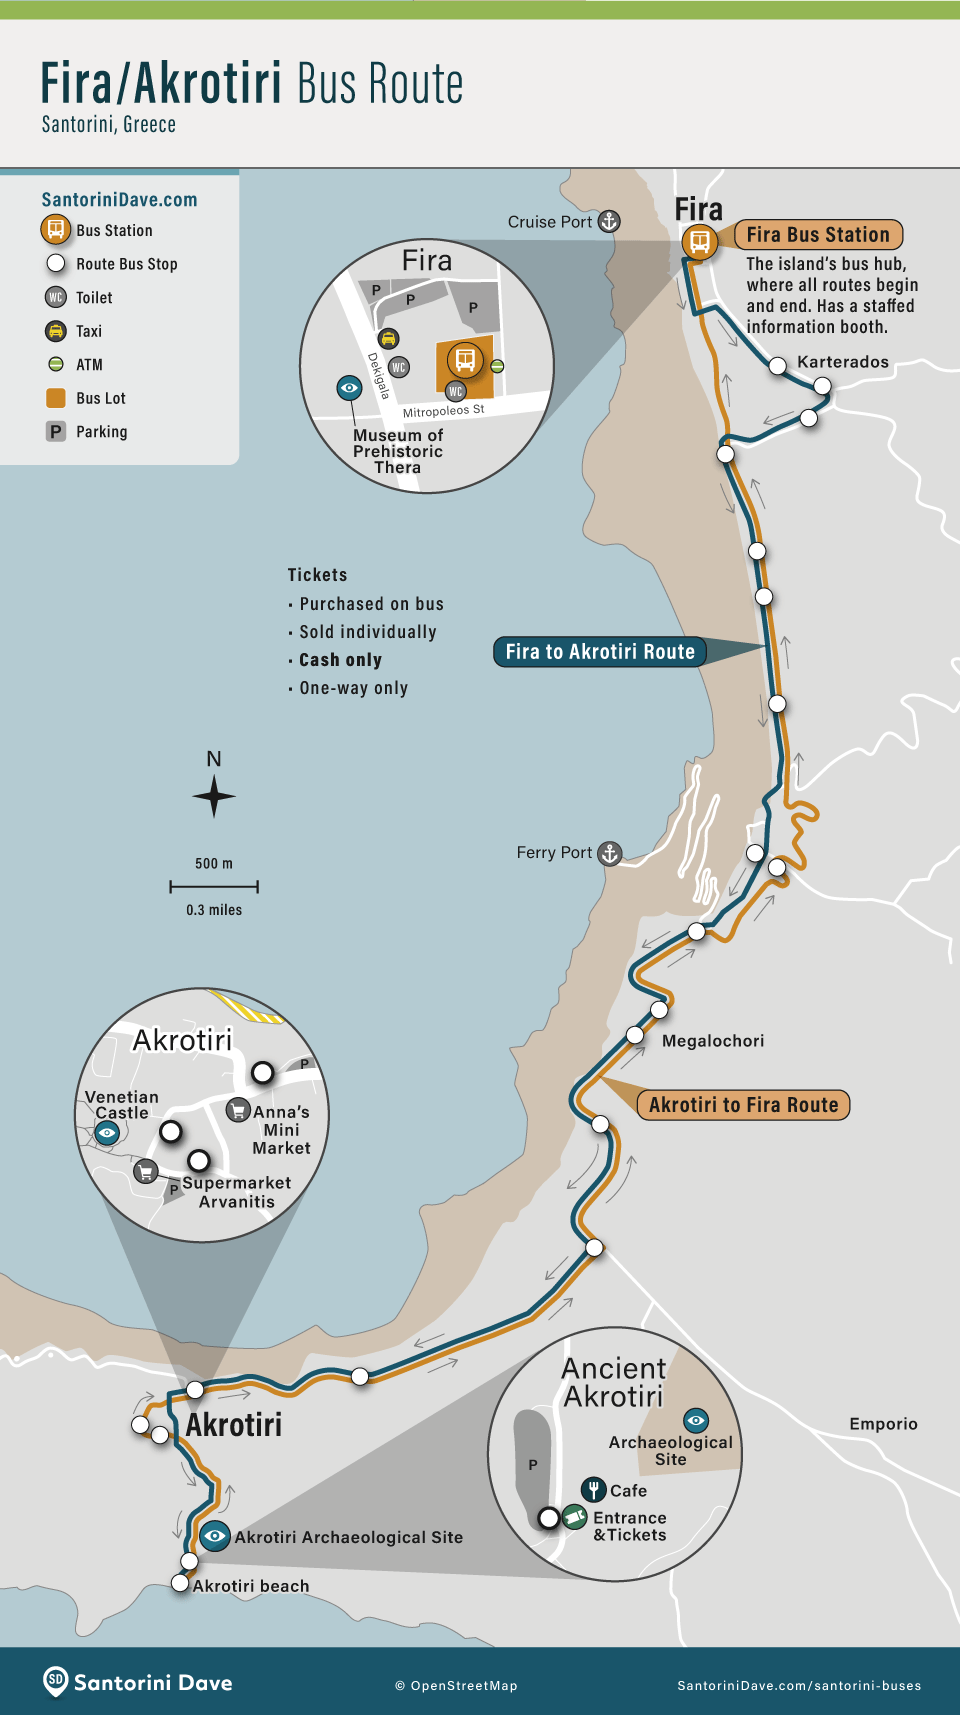 Map of the bus route from Fira to Akrotiri Santorini.